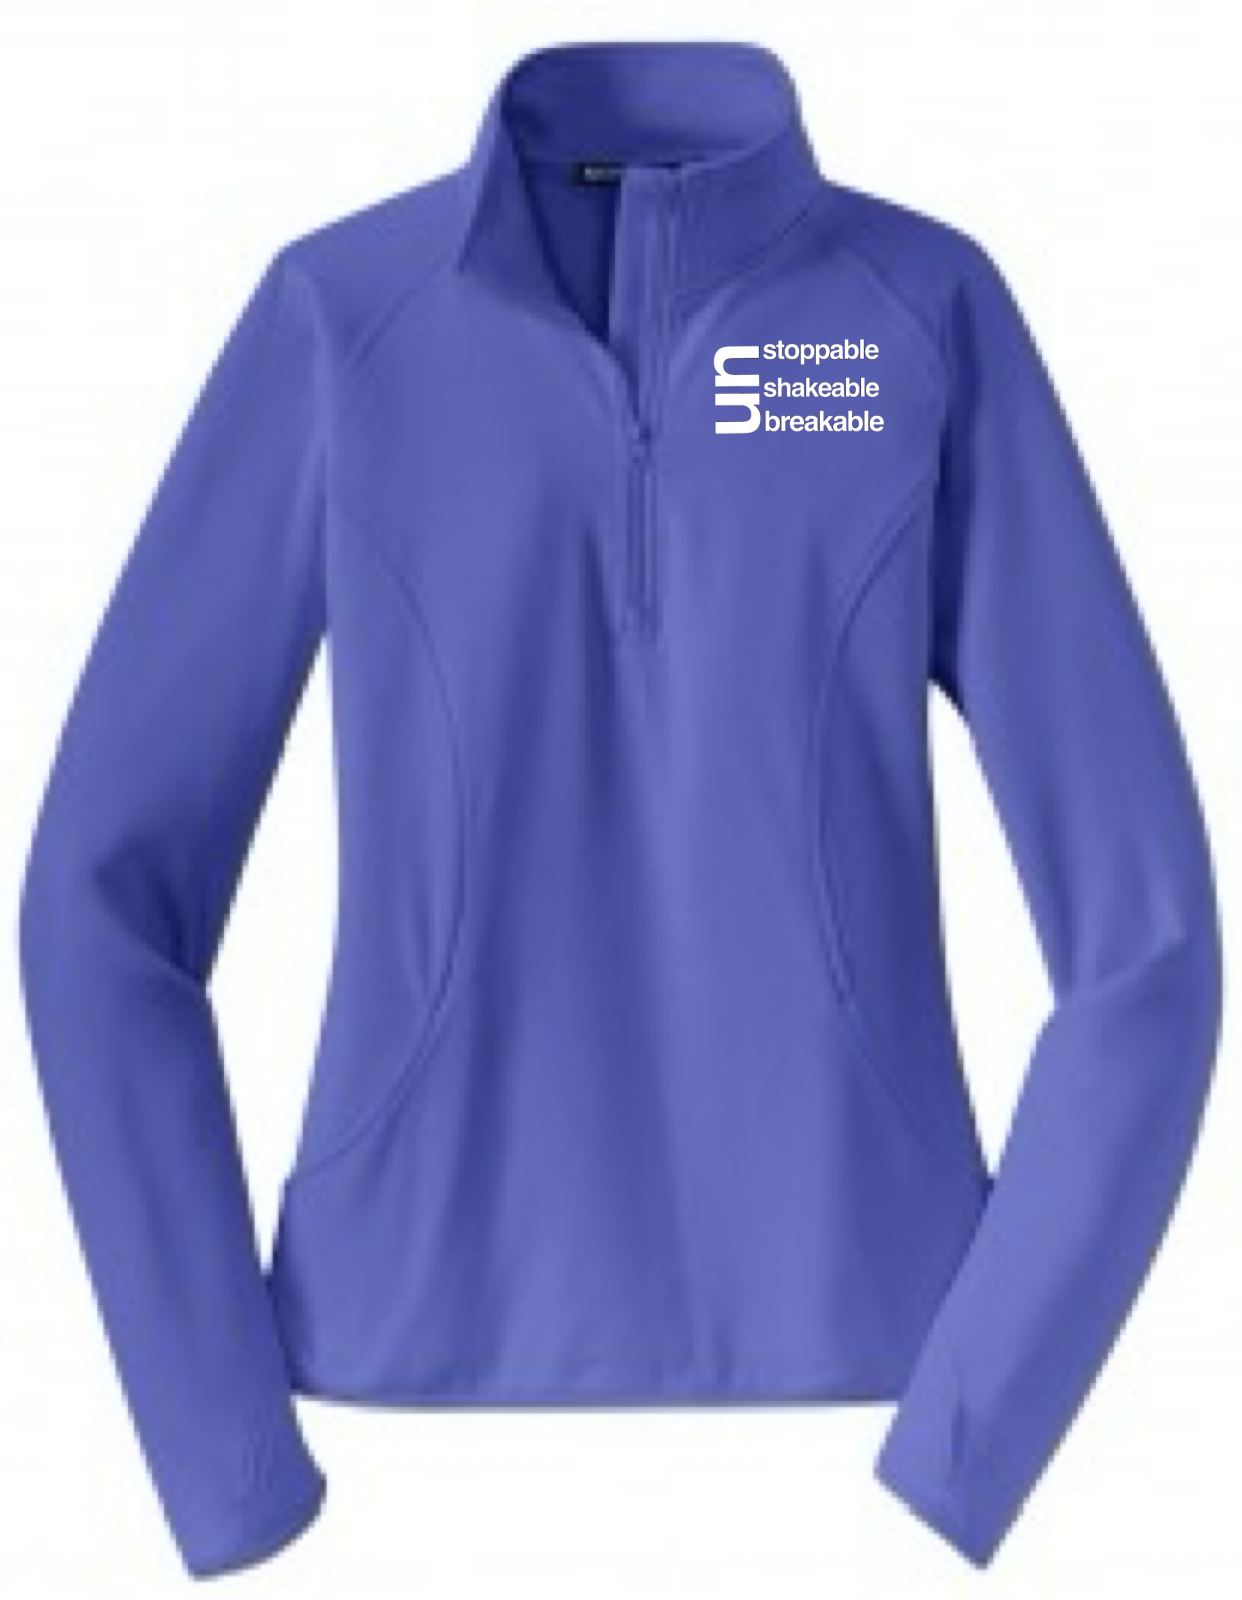 Unstoppable Unshakeable Unbreakable 1/4 Zip Performance Pullover